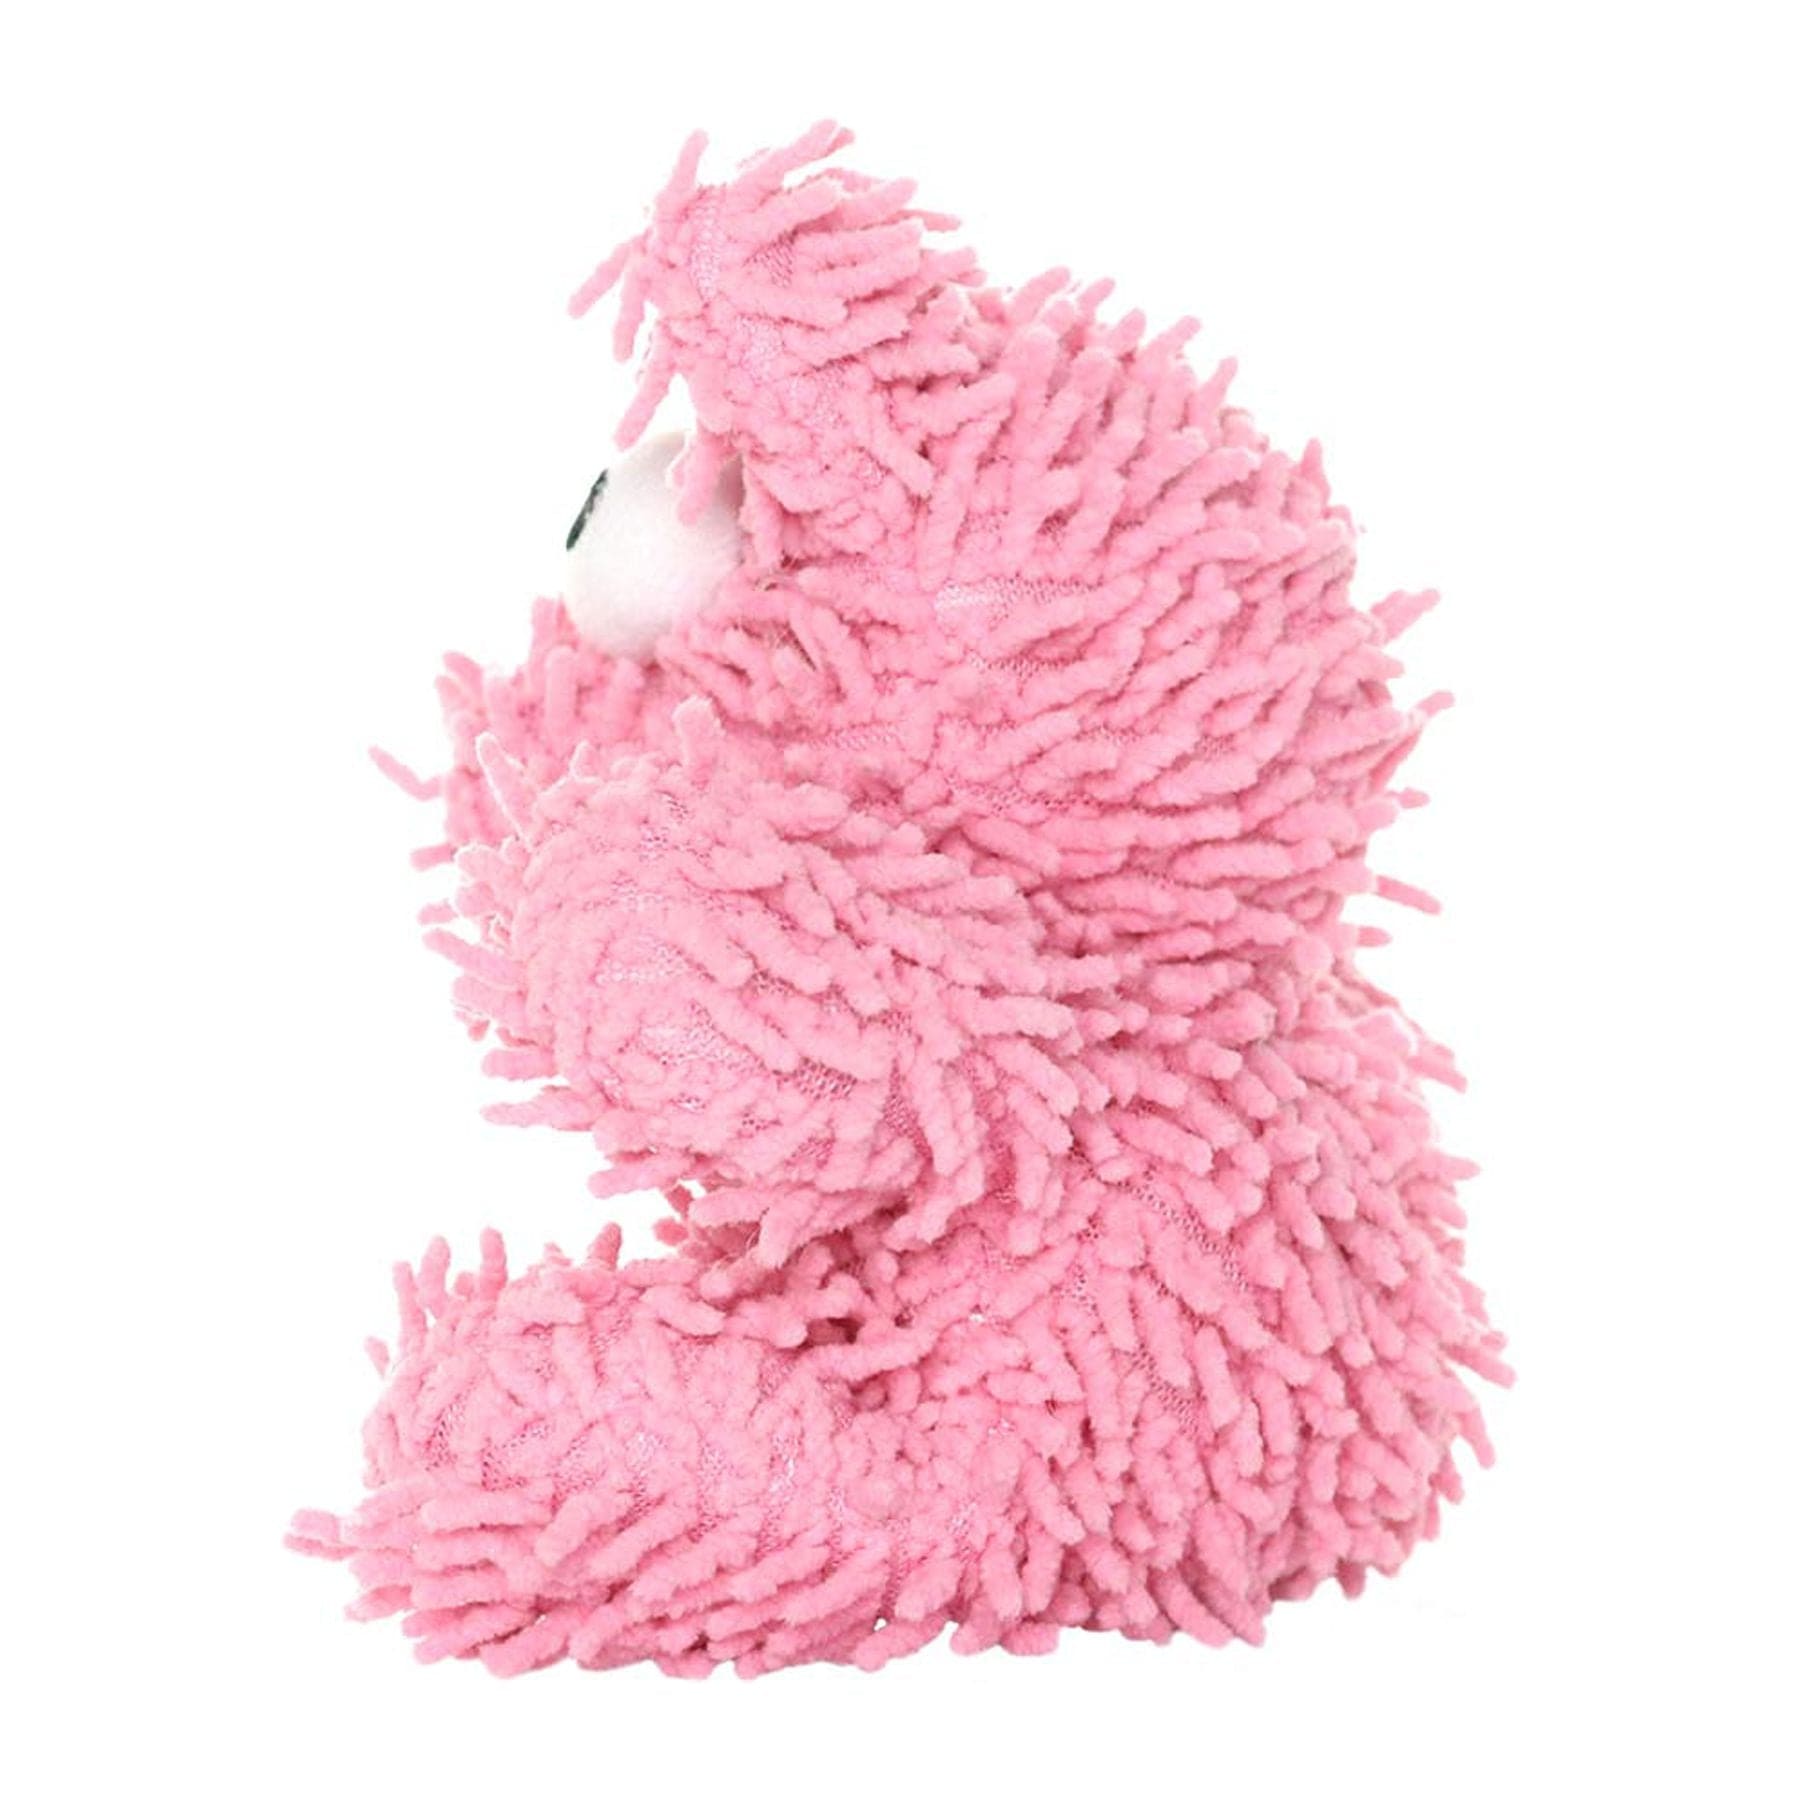 Mighty Microfiber Ball Pig, Squeaky Dog Toy and Jr Pig